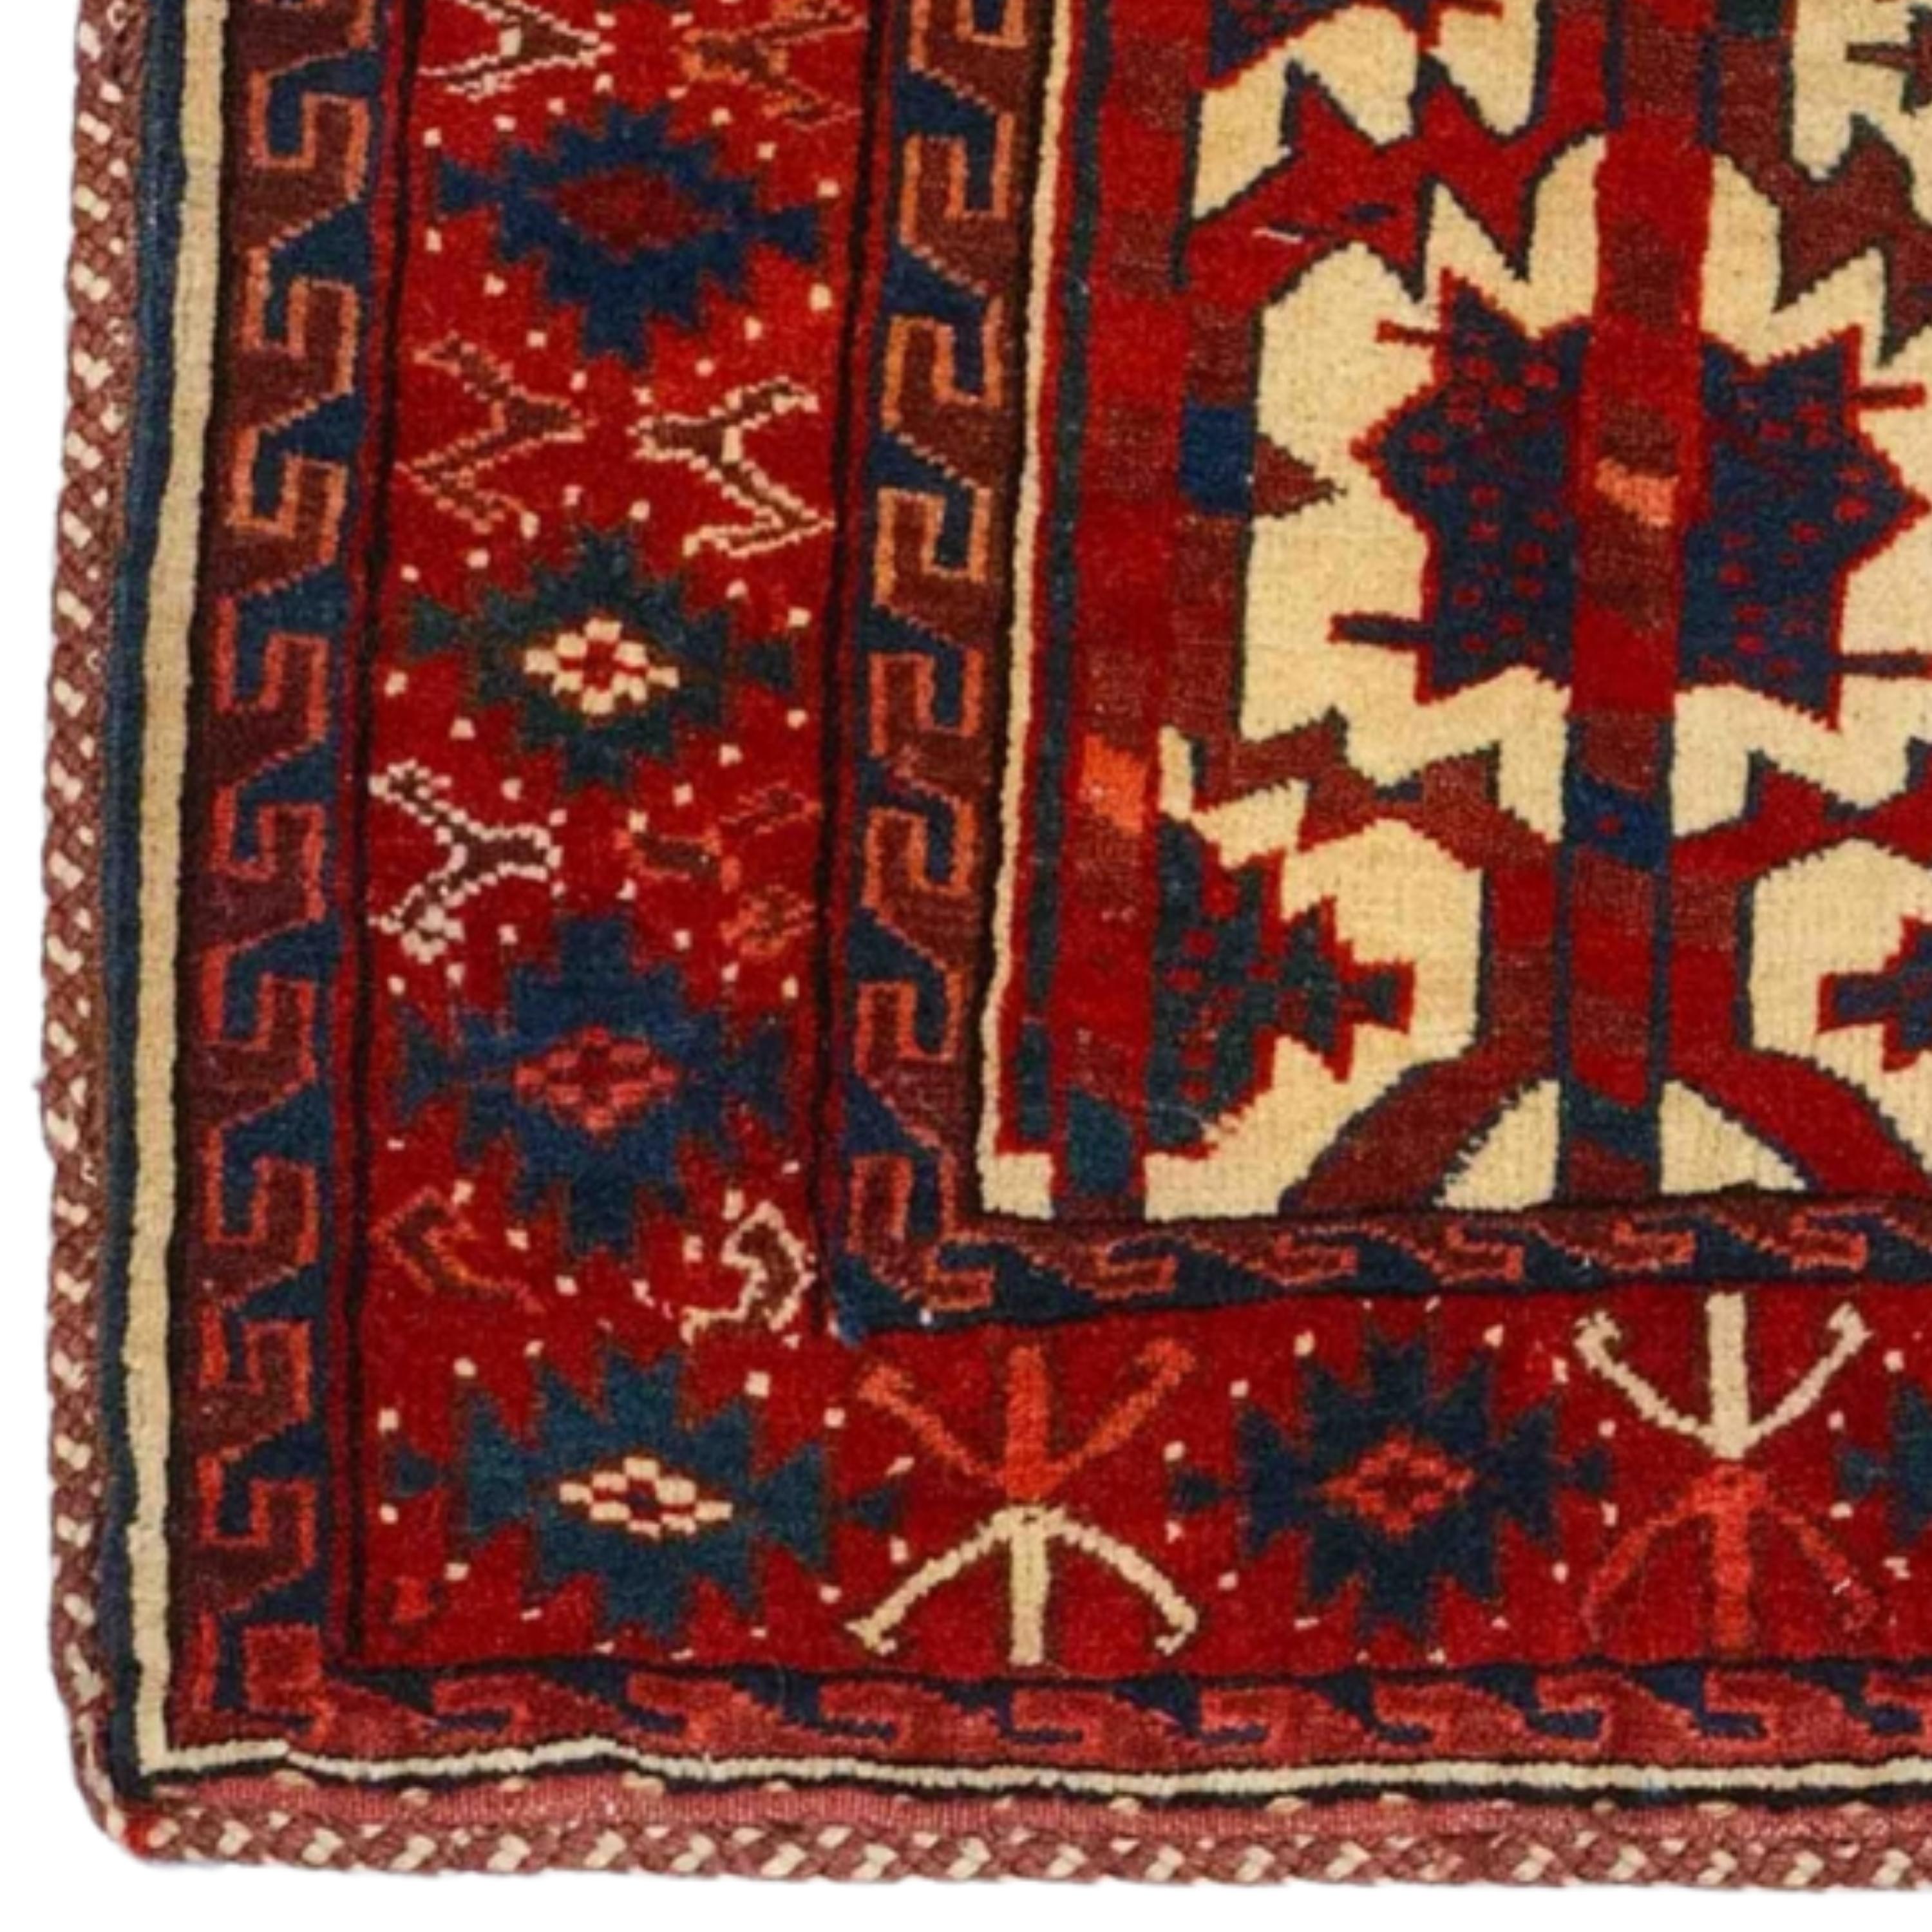 This elegant 19th century Turkmen Yamud Hanging rug is a work of art that will enrich any space with its carefully chosen color palette and sophisticated patterns. Offering the harmony of red, blue and white, this antique piece is a reflection of